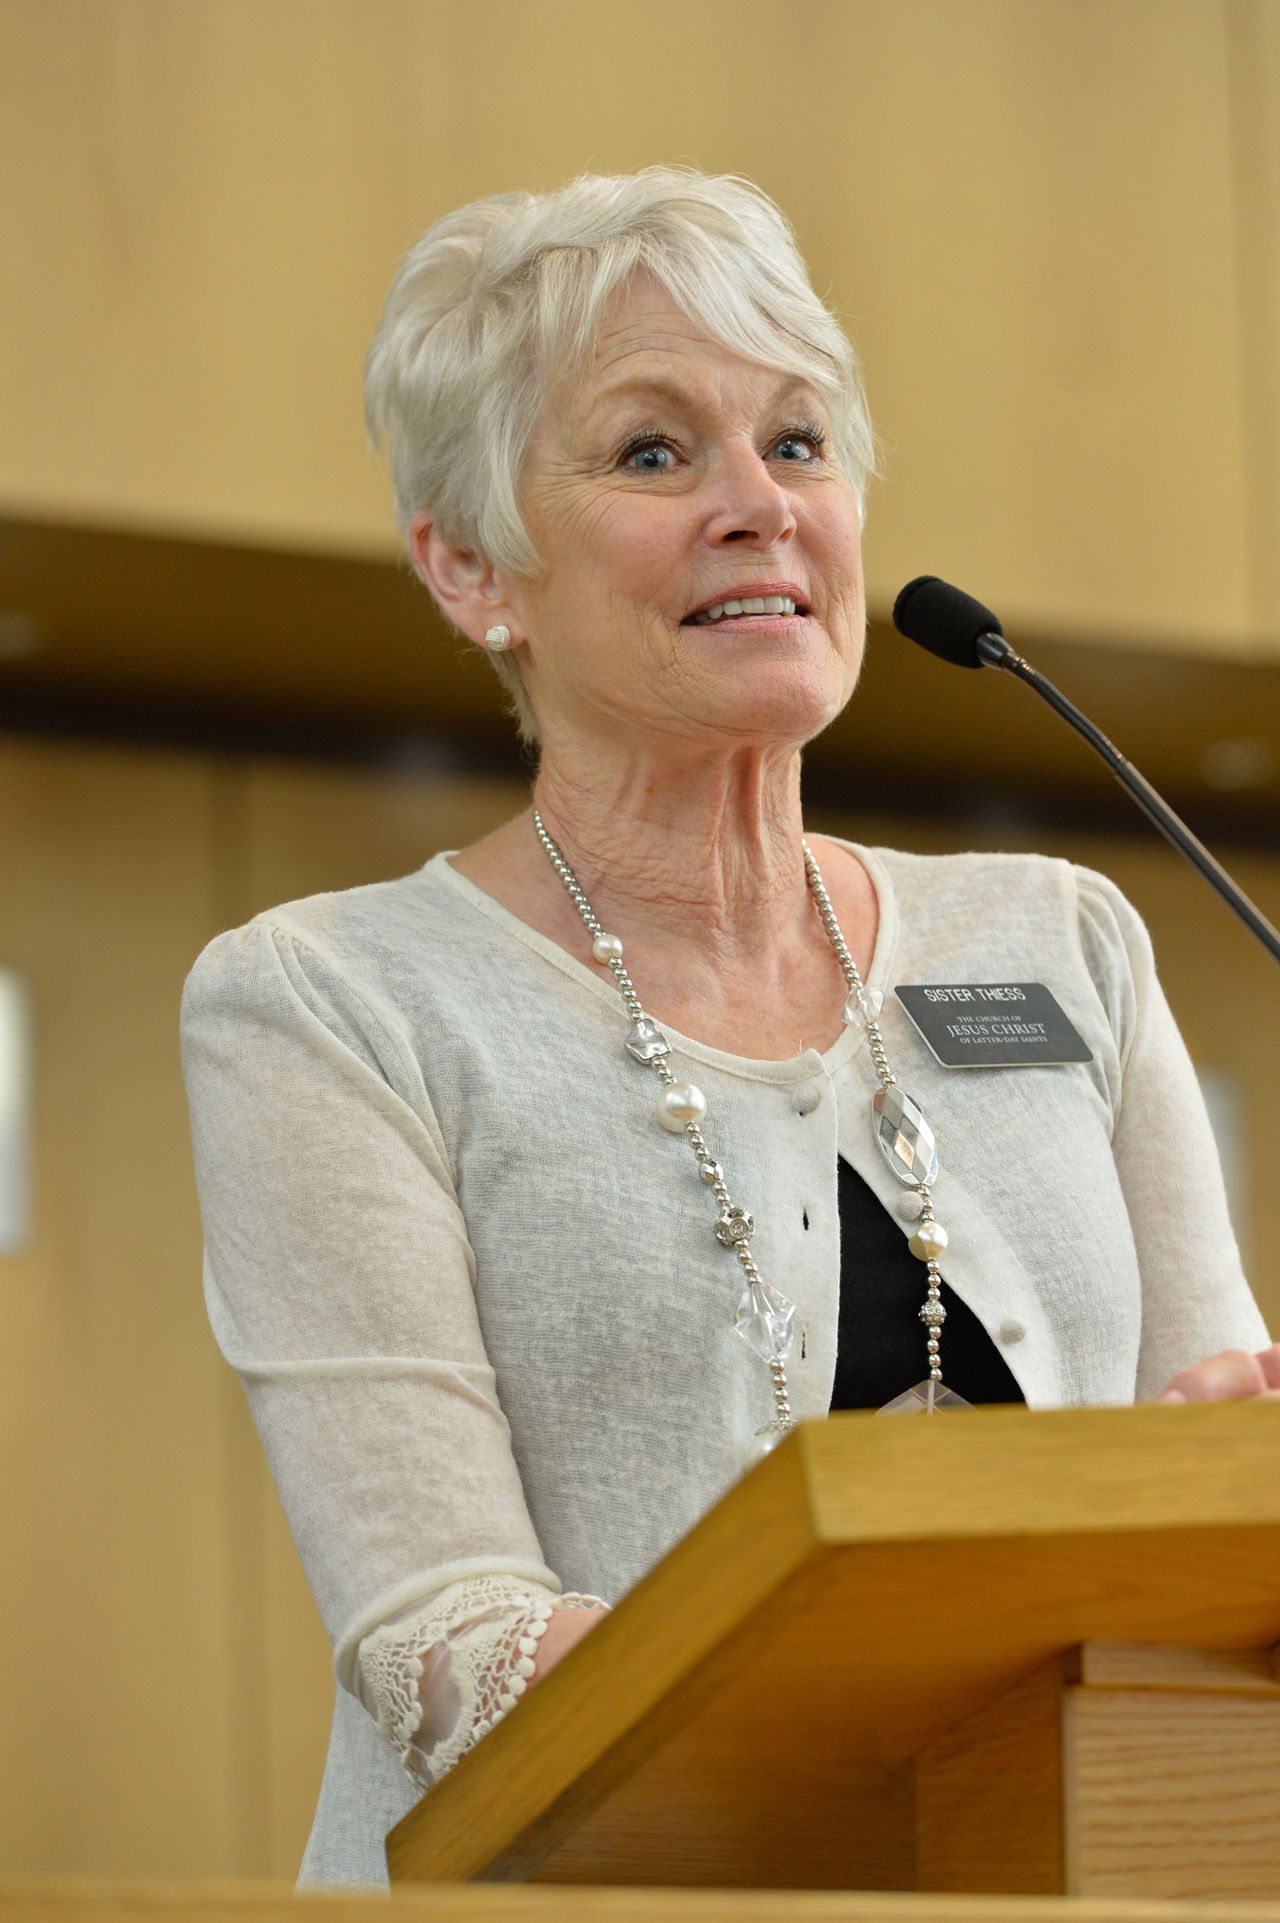 A senior missionary stands at a pulpit to speak to a congregation.